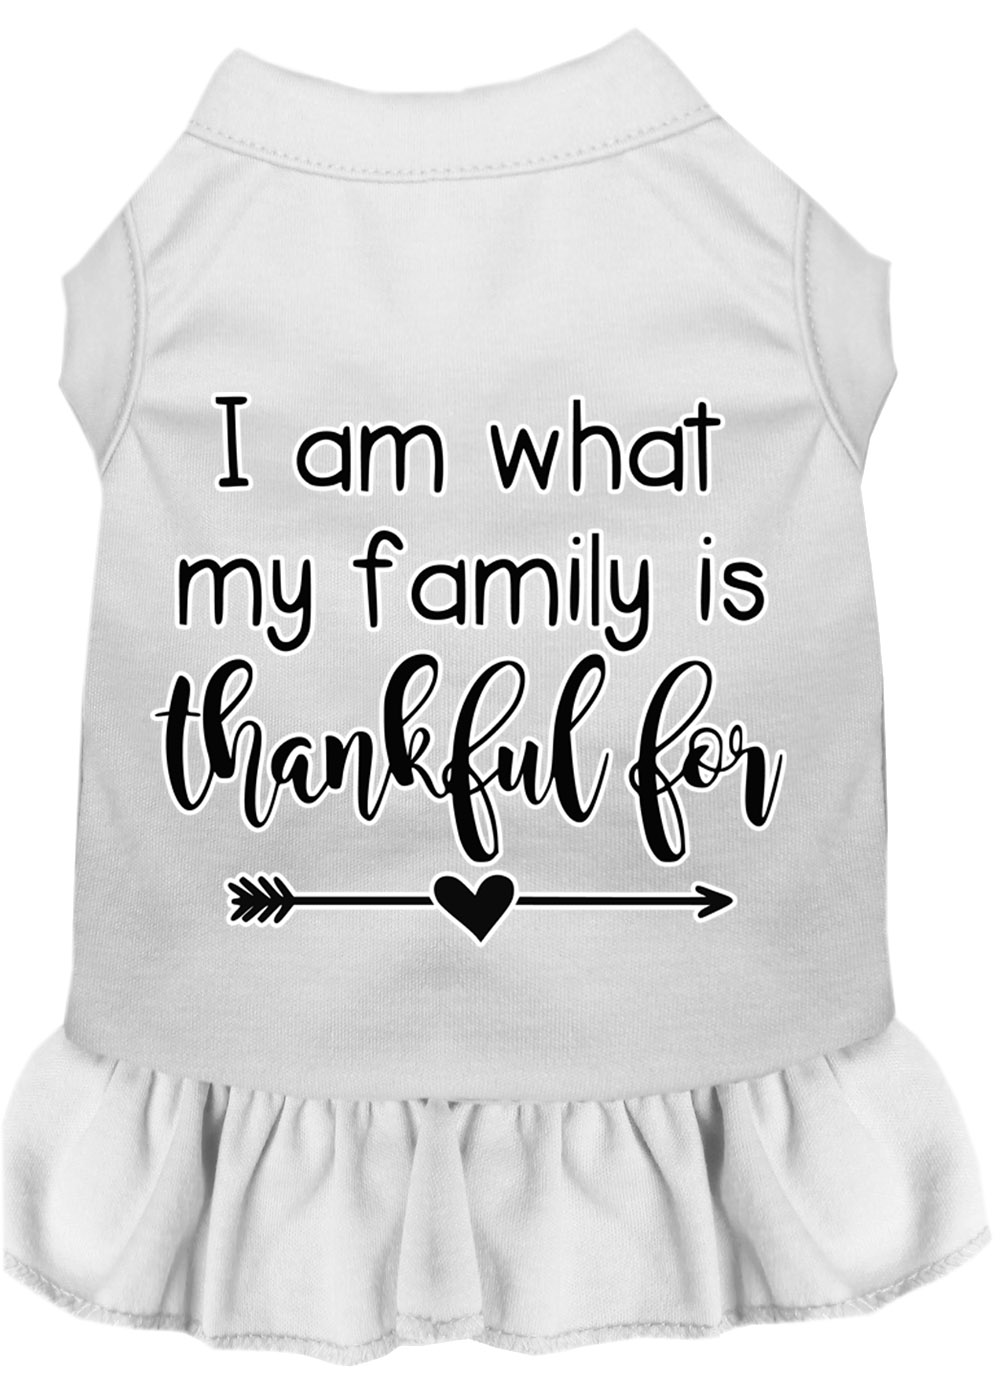 I Am What My Family is Thankful For Screen Print Dog Dress White XL